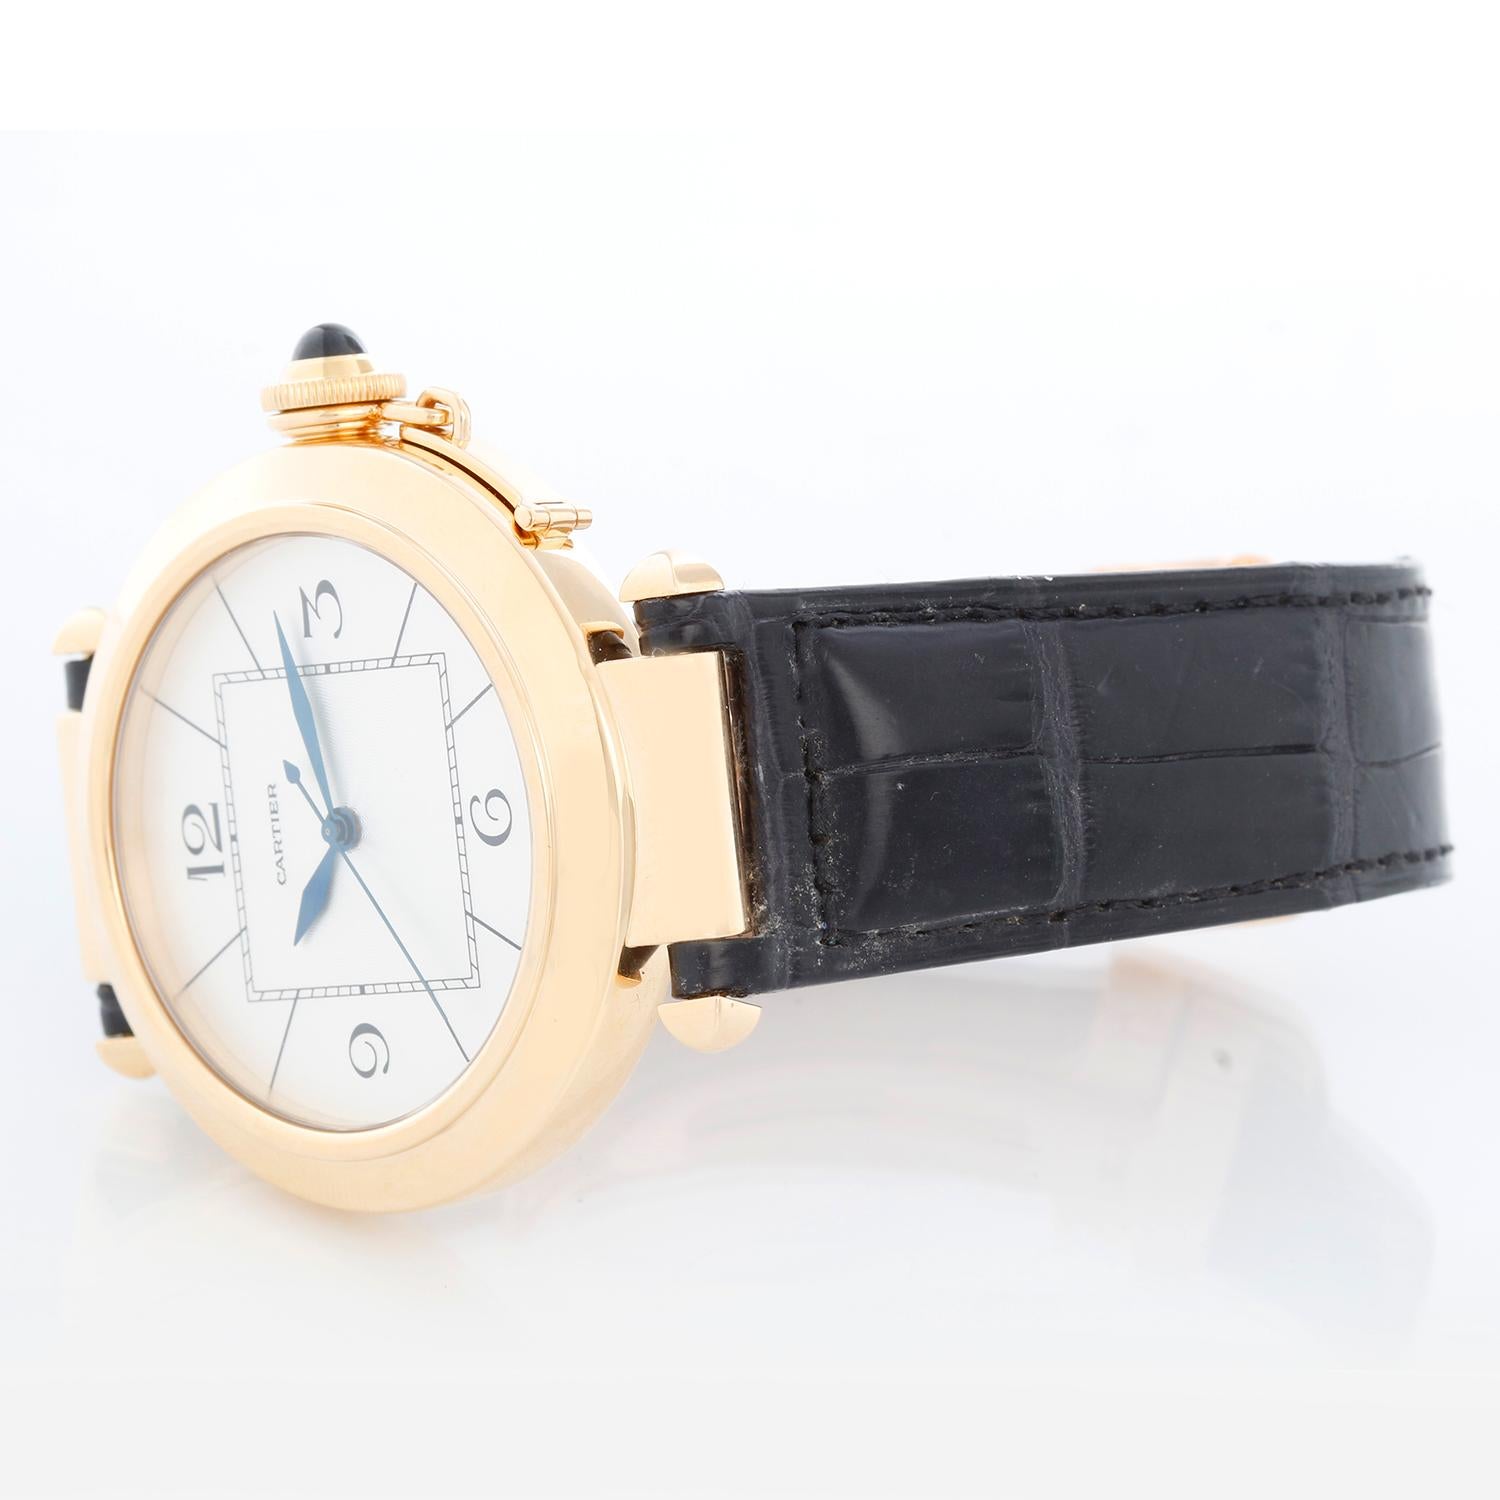 Cartier Pasha 18k Yellow Gold 42 MM Automatic Watch 2726 - Automatic. 18k yellow gold case with sapphire crown (42 mm diameter). Silver guilloche dial with blue hands. Croc strap with 18k yellow gold Cartier deployant buckle. Pre-owned with Cartier